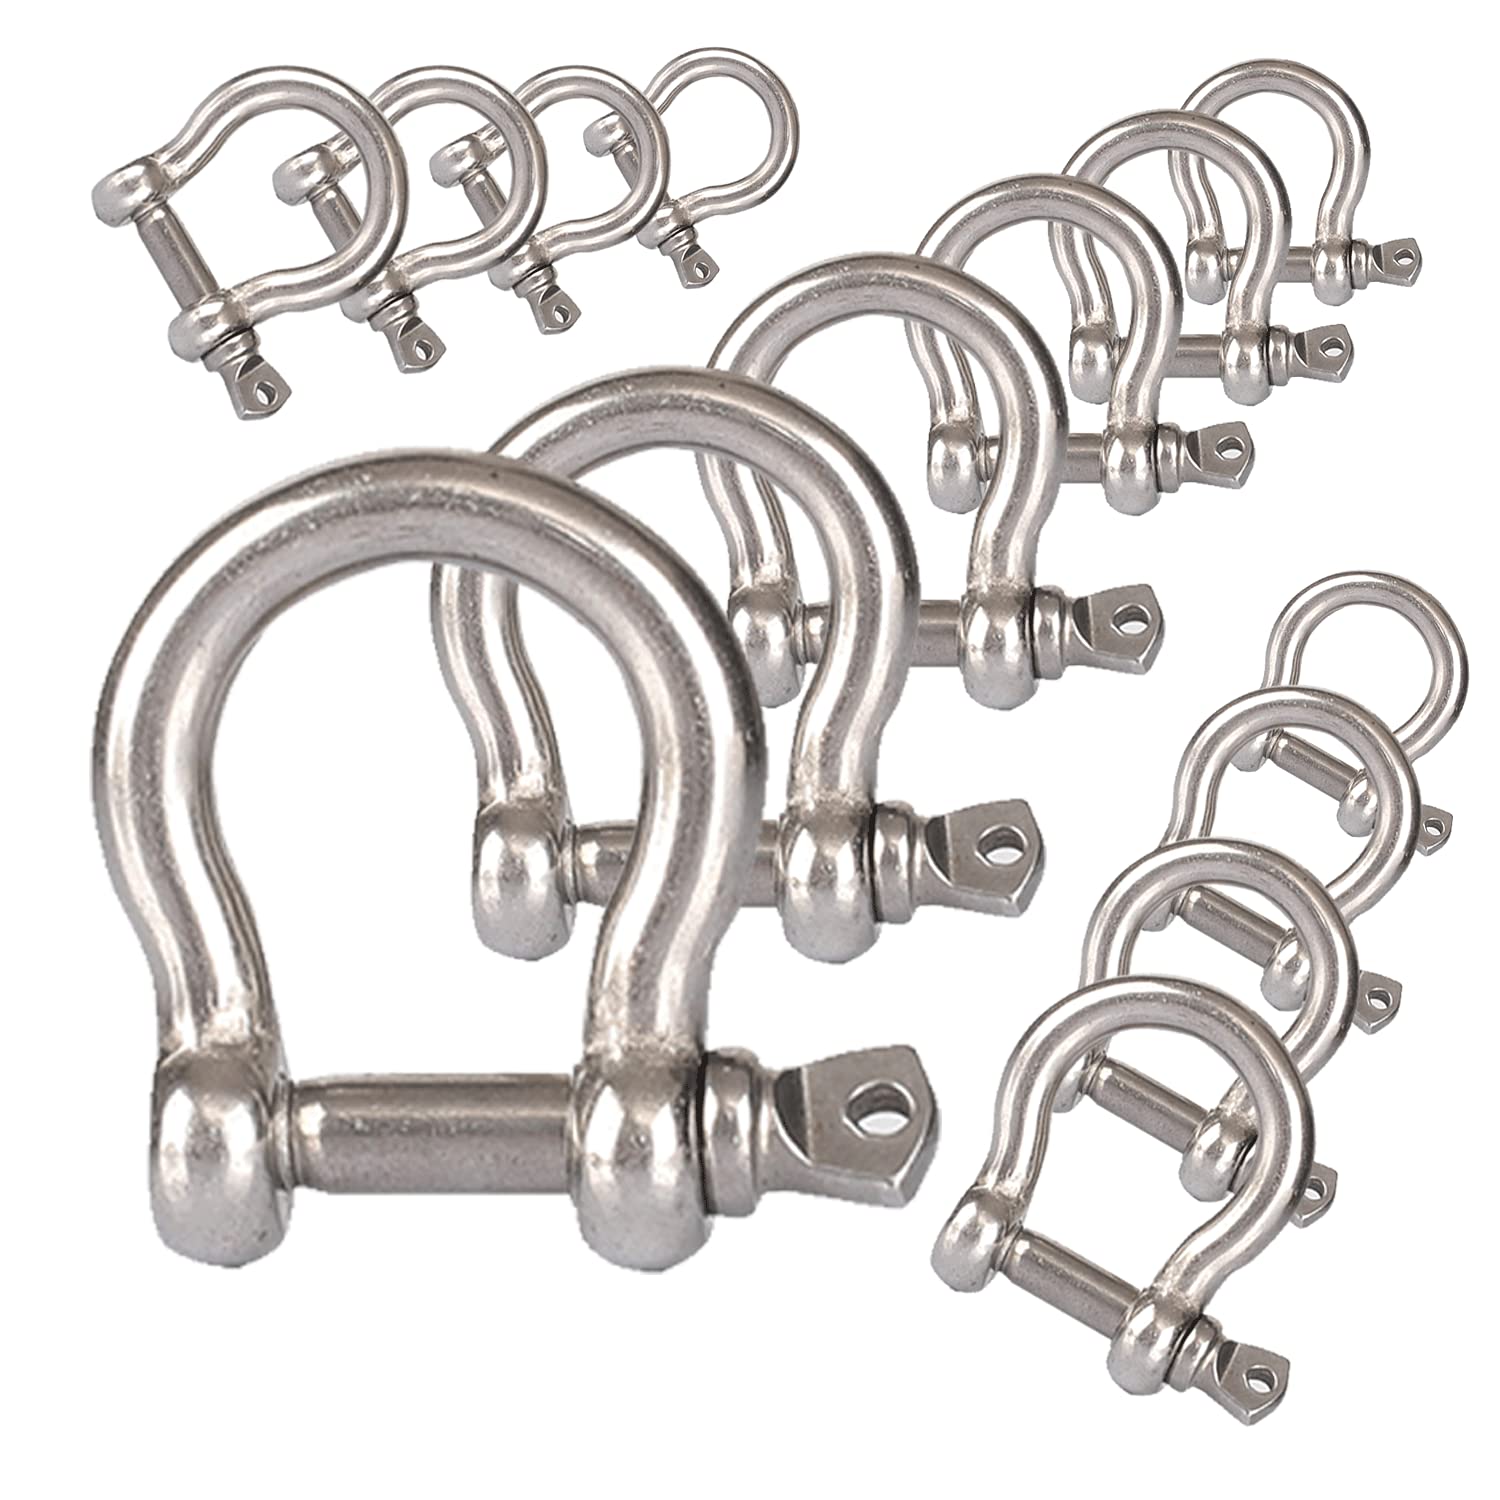 20PCS 1/4 Inch Screw Pin Anchor Shackle,M6 Heavy Duty Stainless